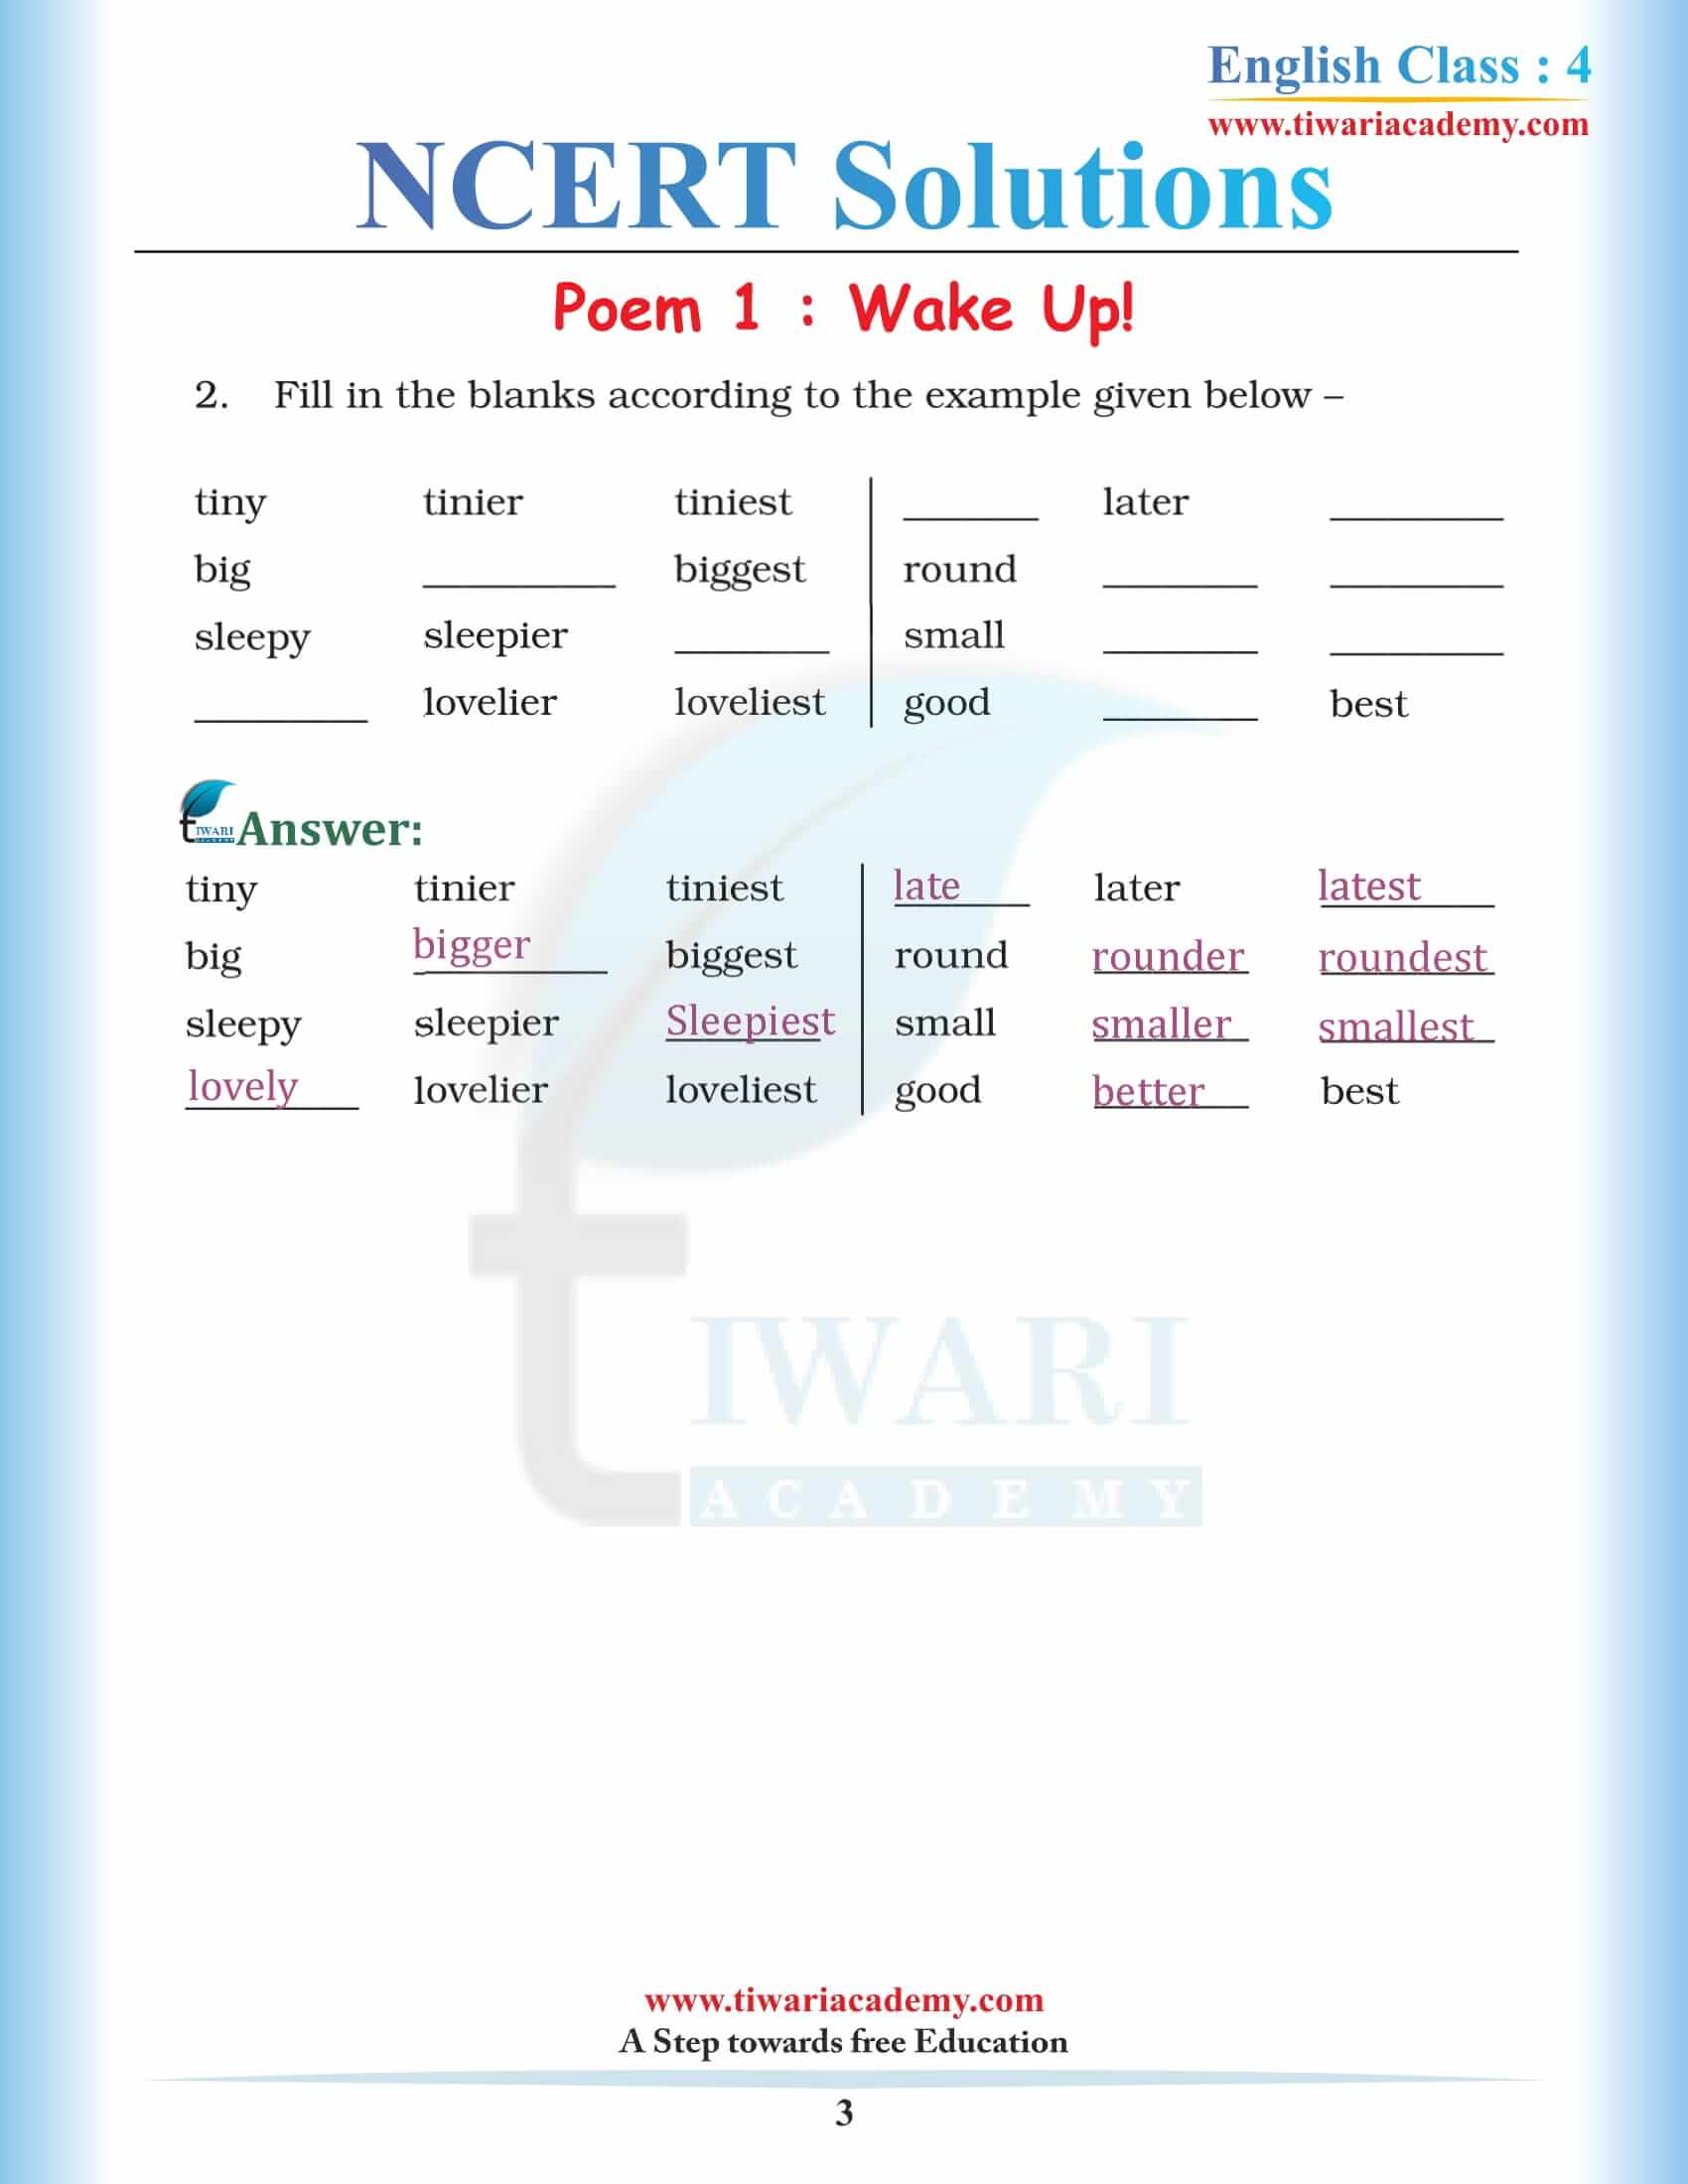 NCERT Solutions for Class 4 English Unit 1